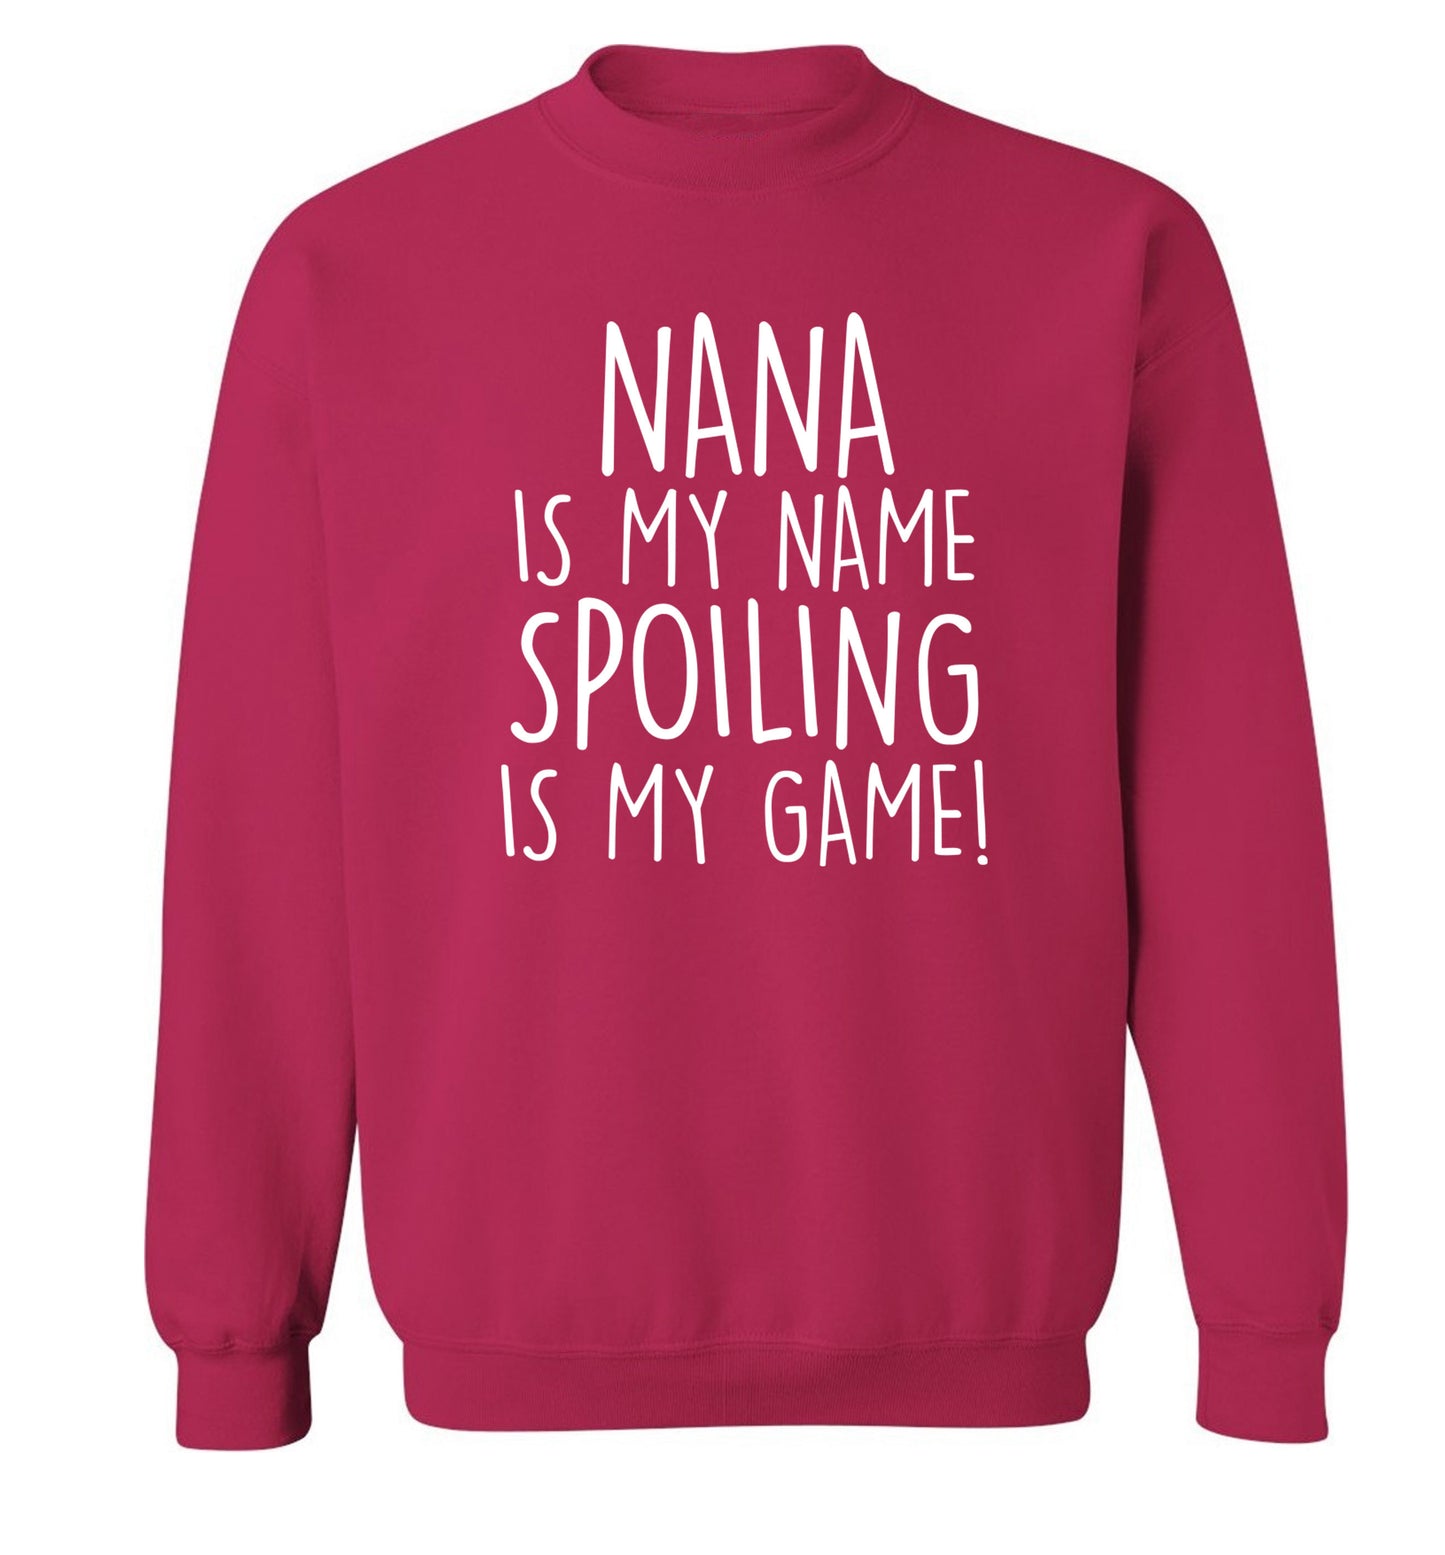 Nana is my name, spoiling is my game Adult's unisex pink Sweater 2XL